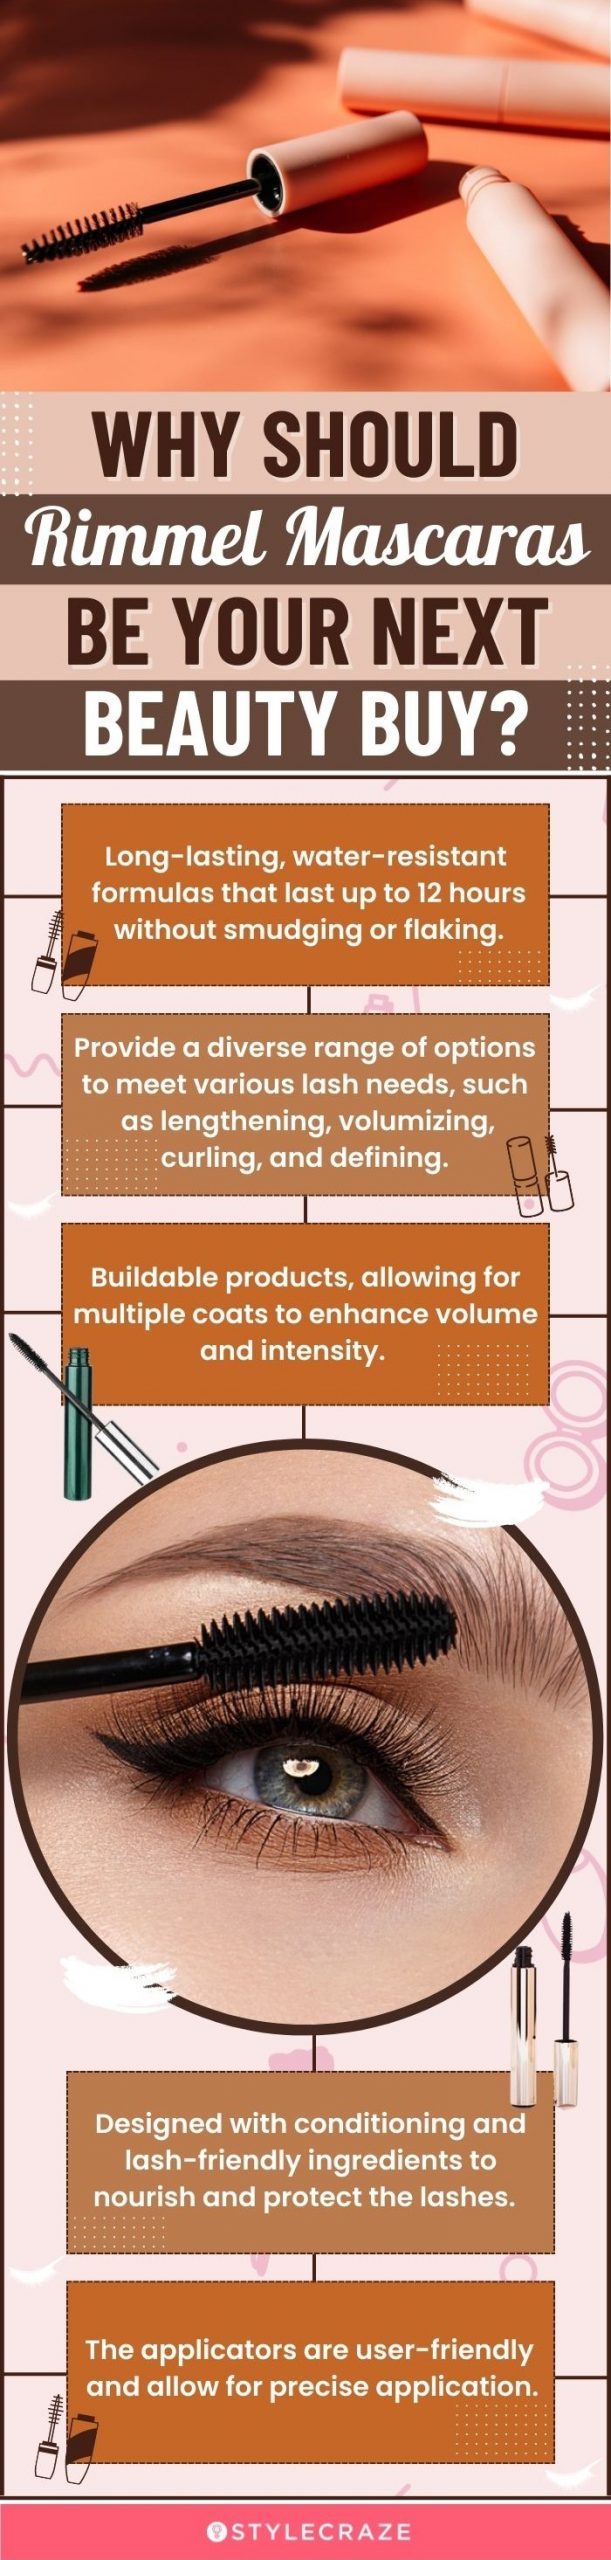 Why Should Rimmel Mascaras Be Your Next Beauty Buy? (infographic)